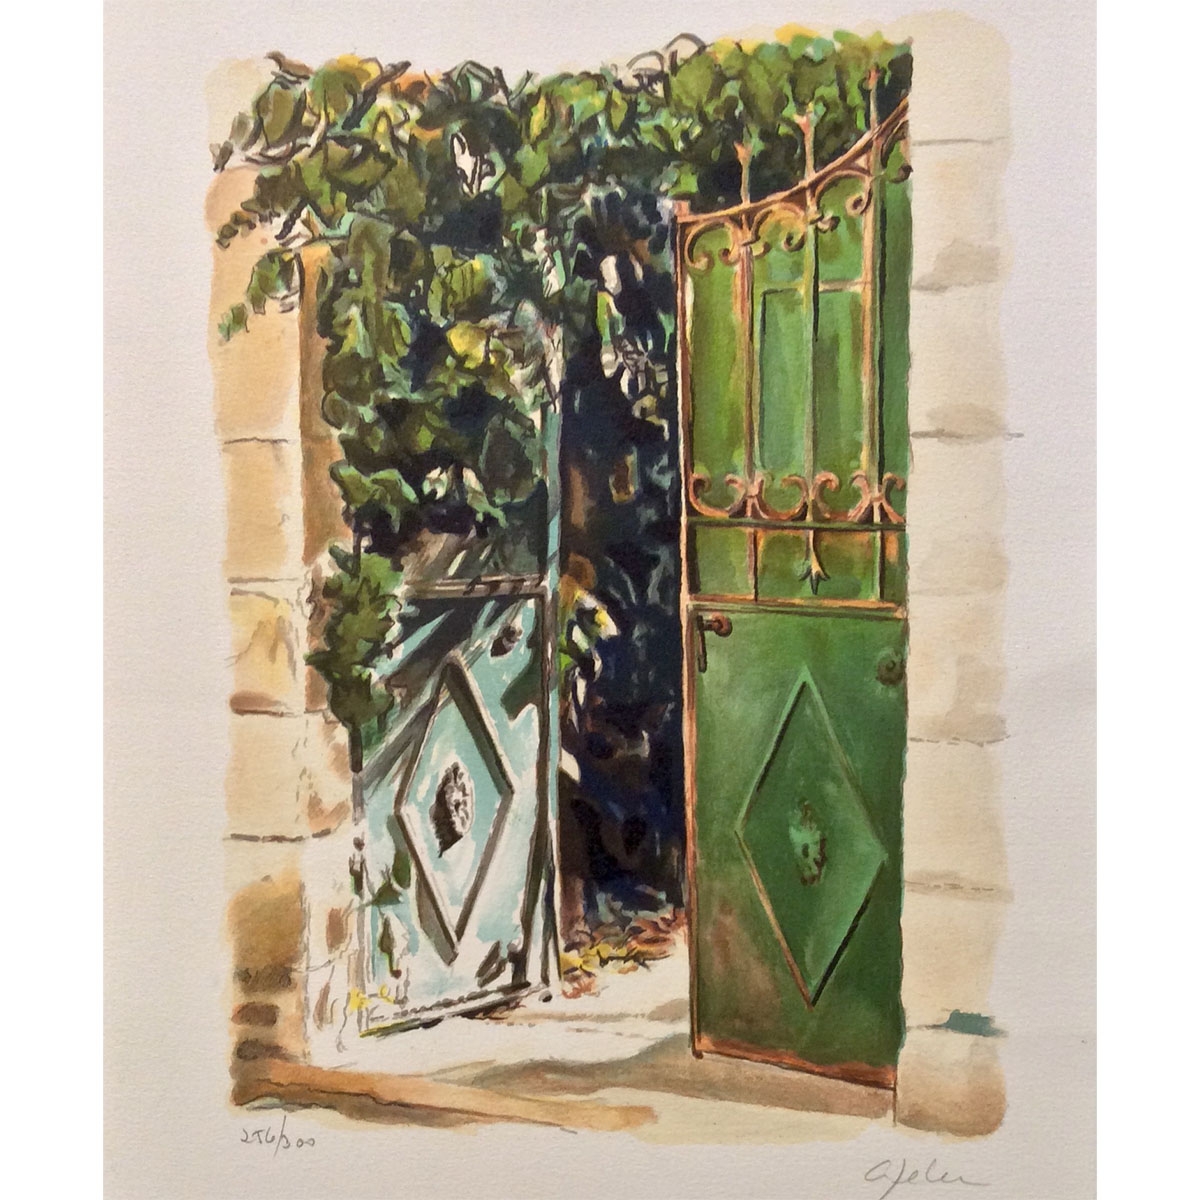 Arie Azene - Green Door in Jerusalem (Hand Signed & Numbered Limited Edition Serigraph) - 1